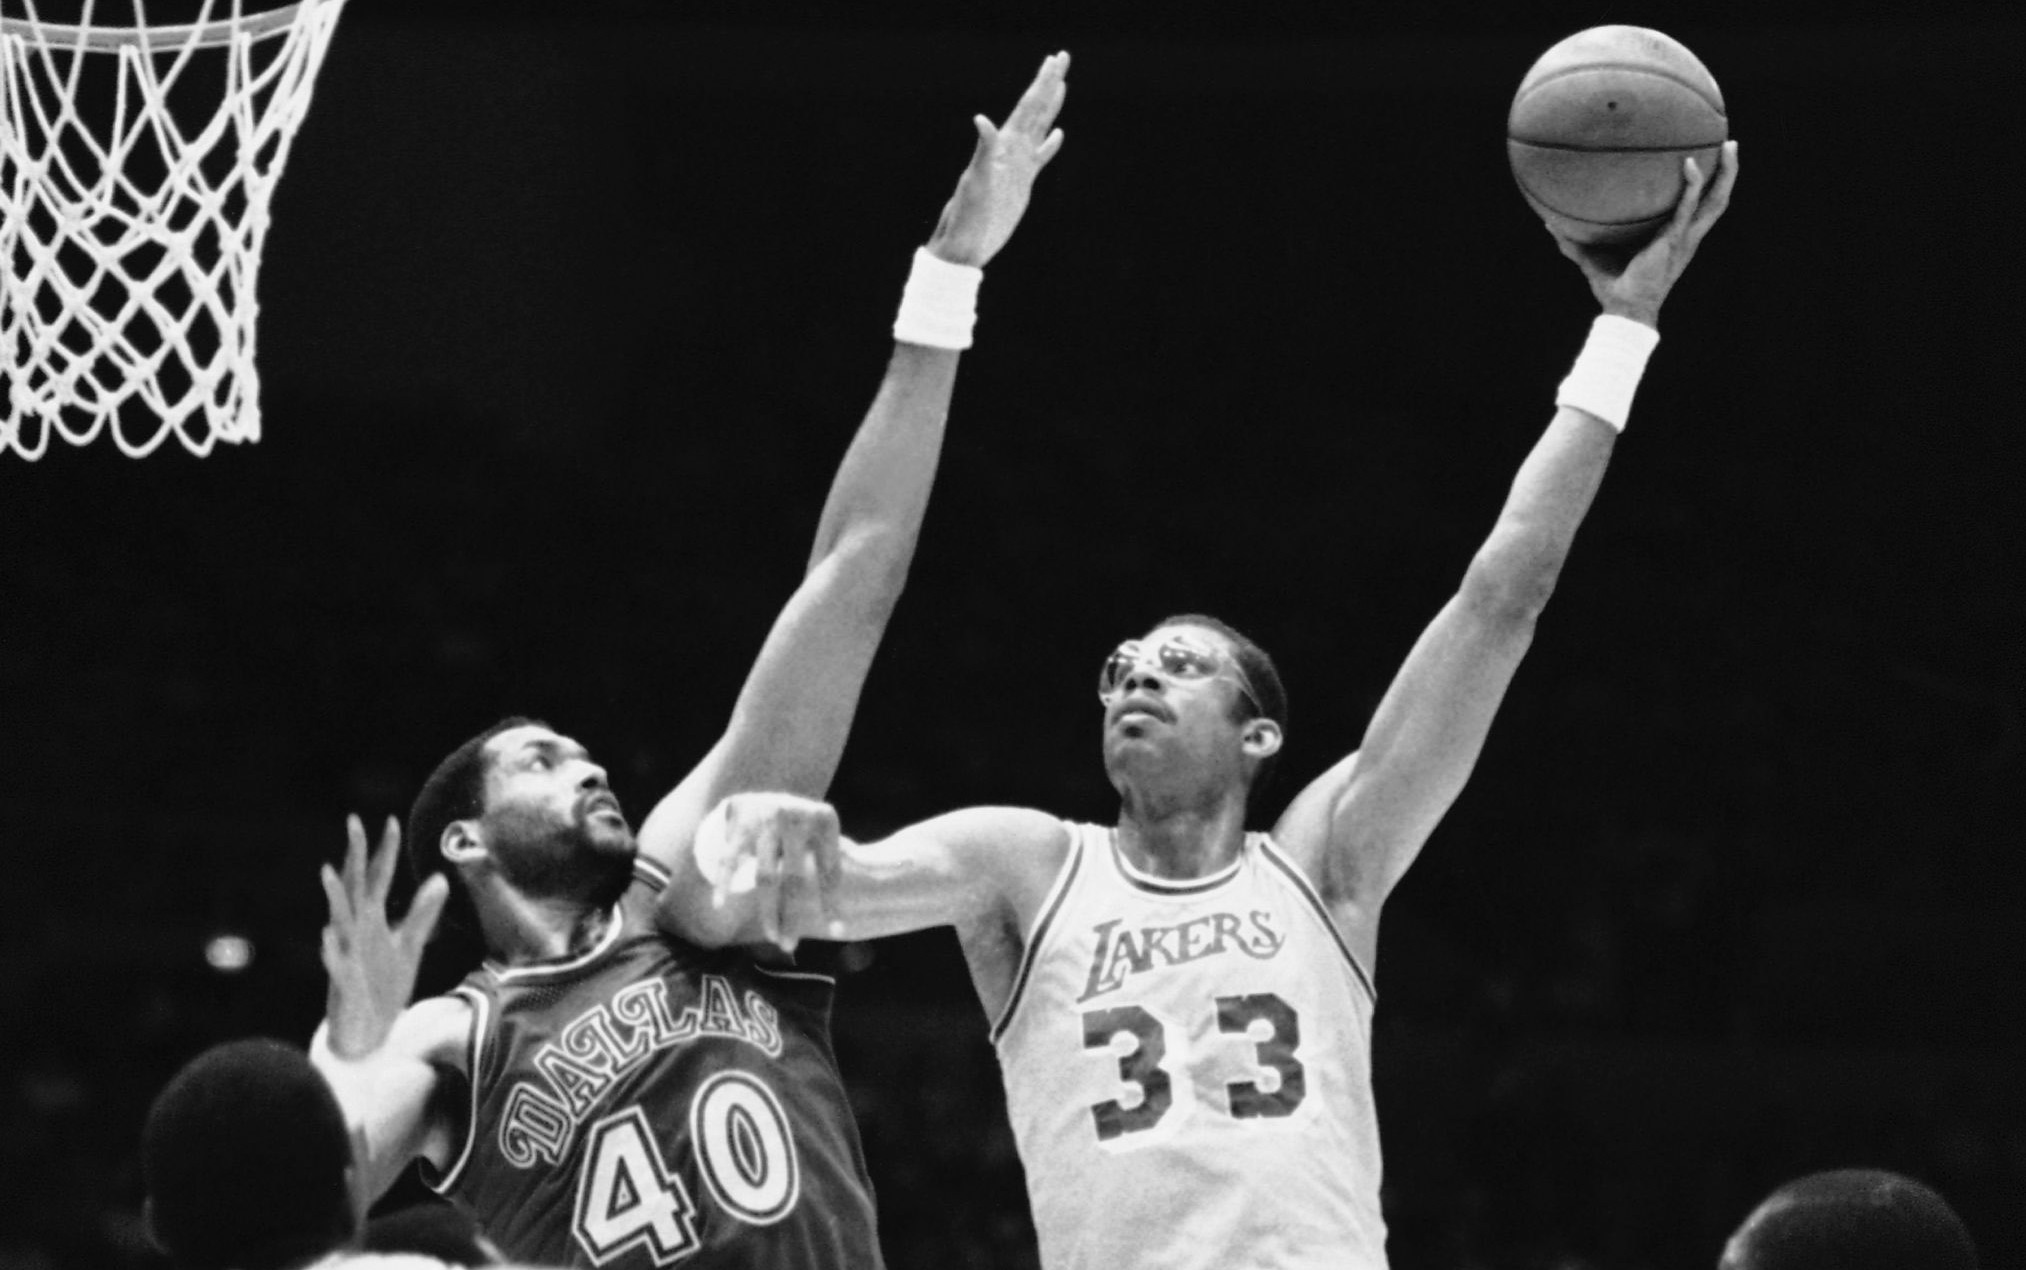 Most iconic NBA numbers: #34 – Bill Russell and Julius Erving, NBA News